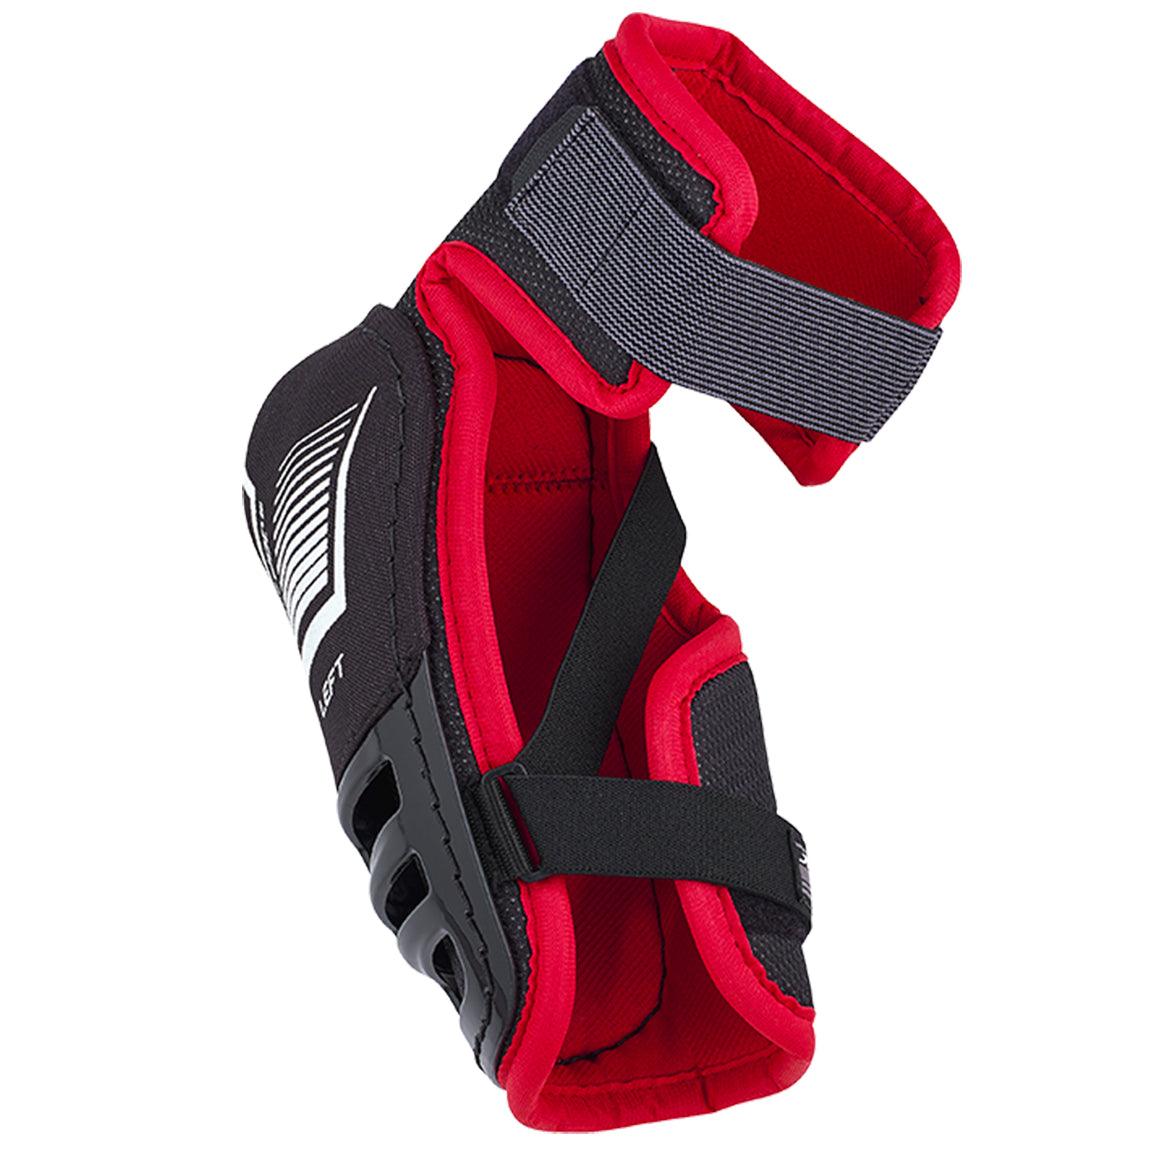 JetSpeed FT350 Elbow Pads - Senior - Sports Excellence